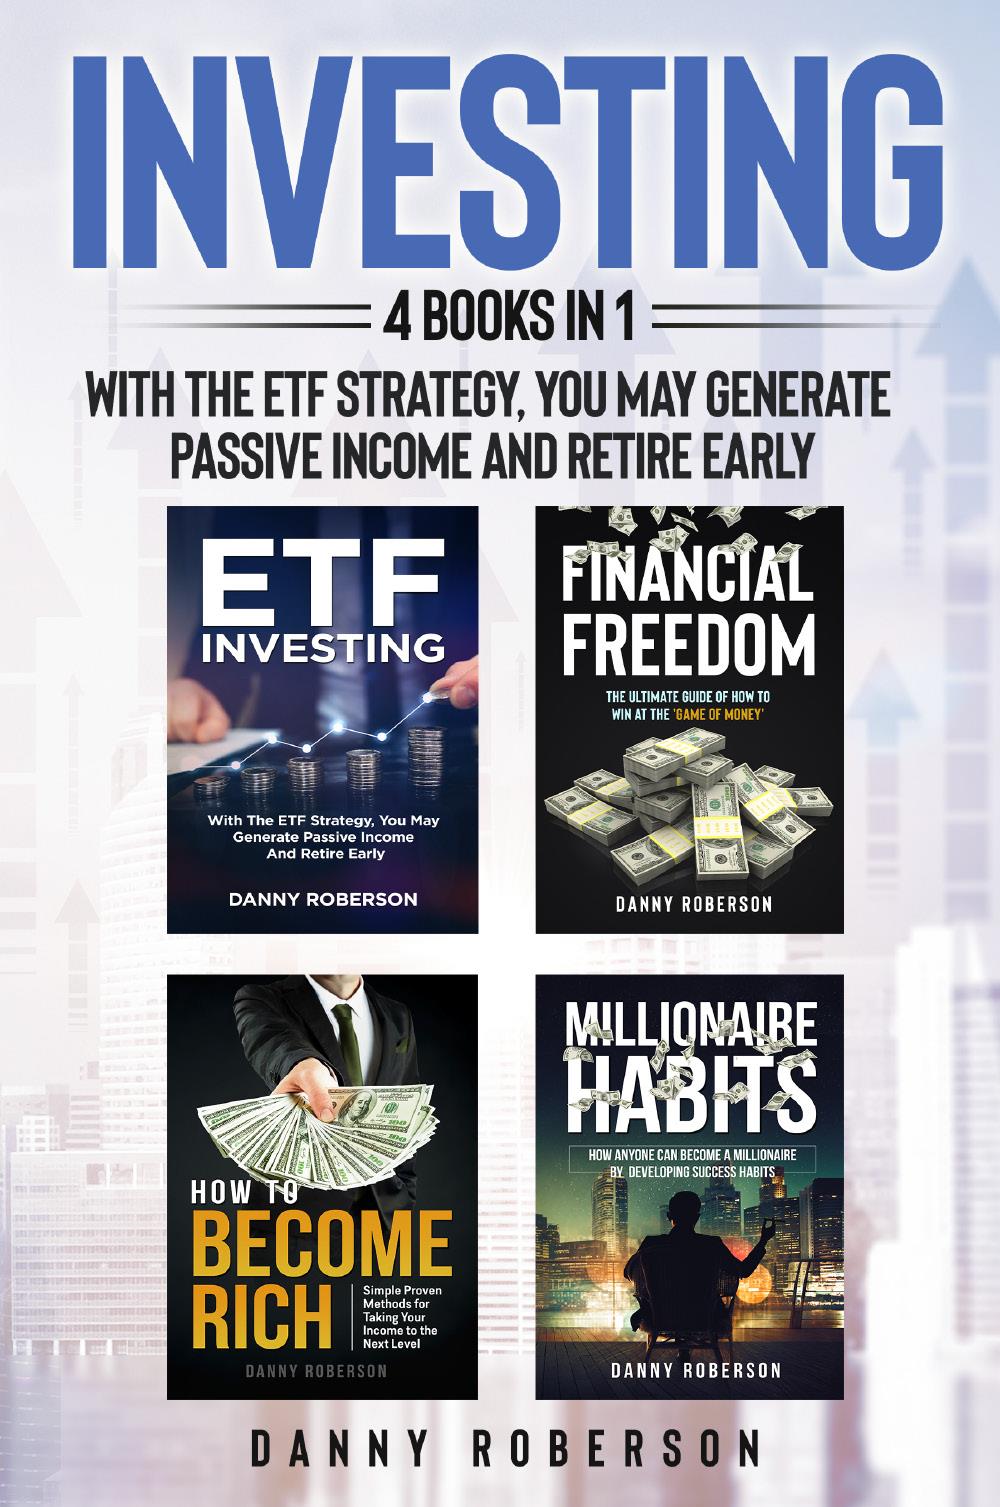 Investing (4 Books in 1). With the ETF Strategy, you may generate passive income and retire early